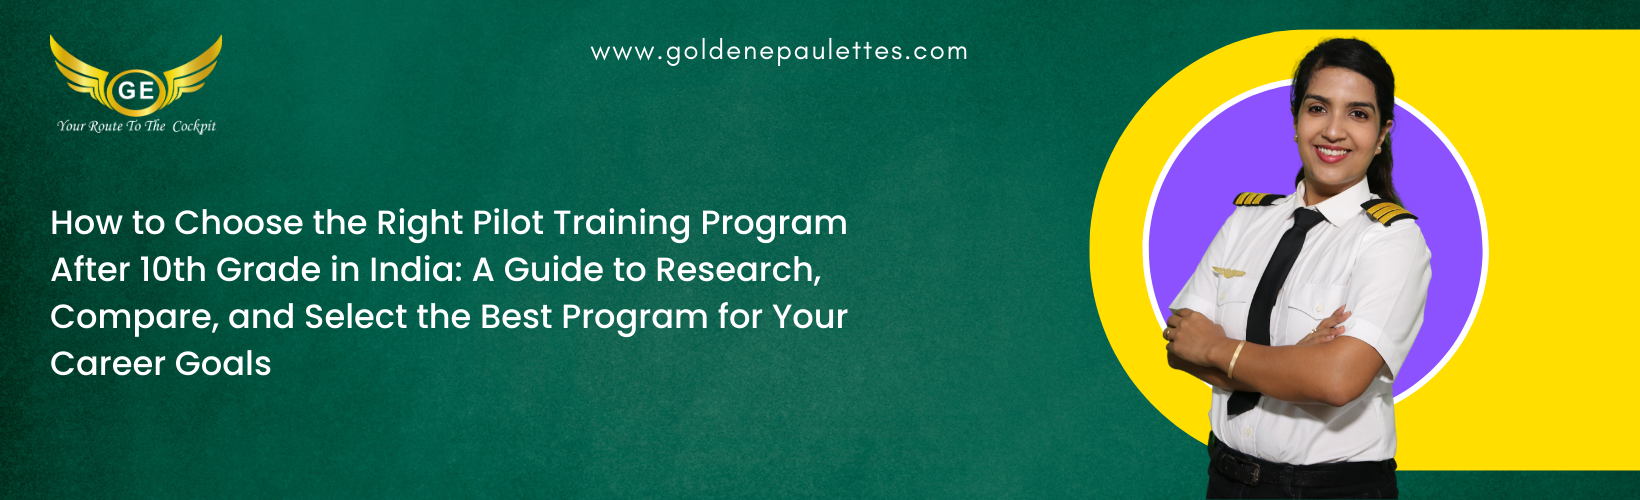 How to Choose the Right Pilot Training Program After 10th Grade in India